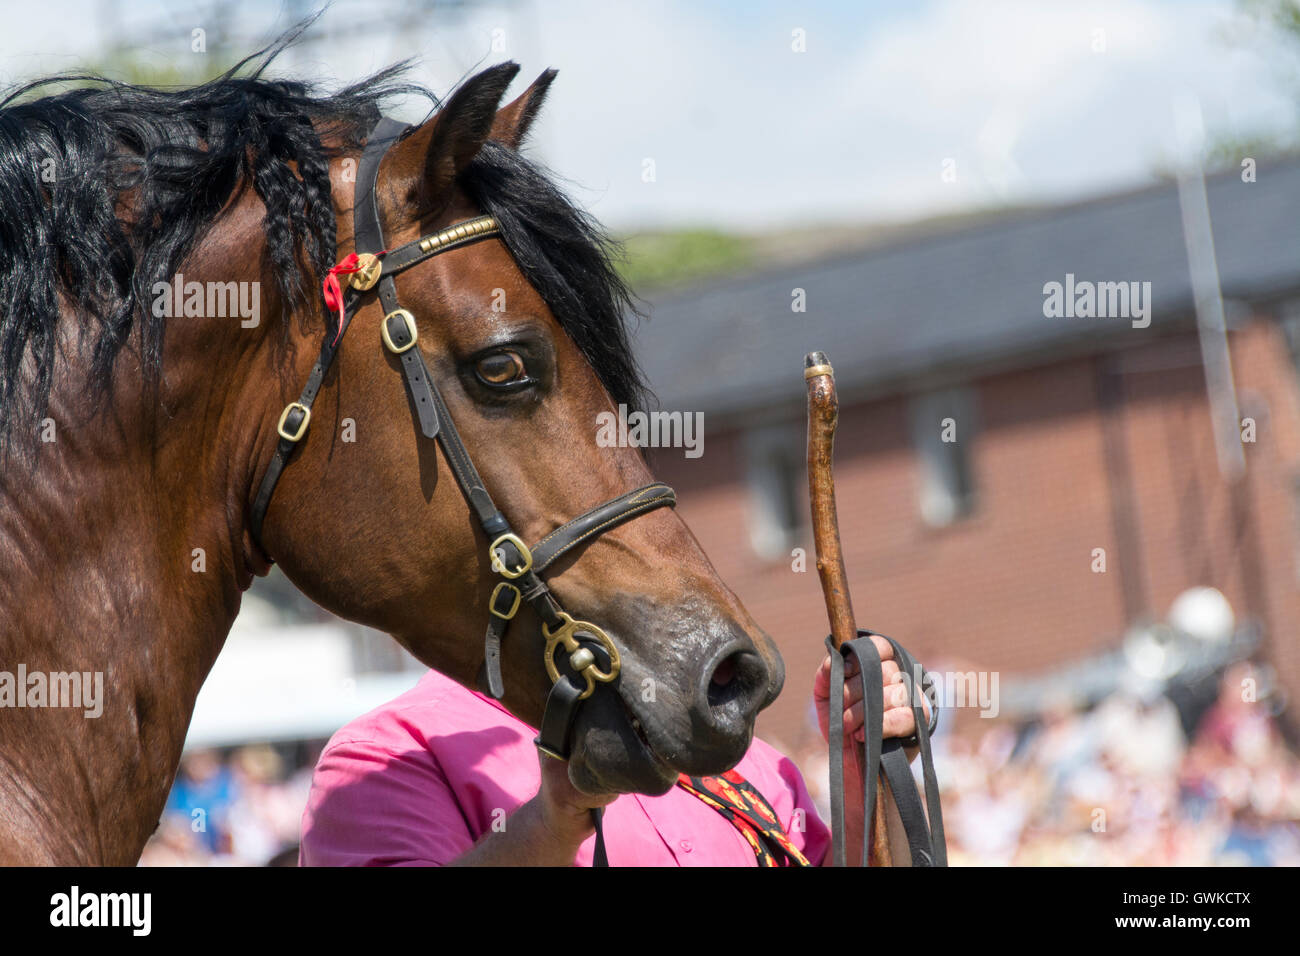 Welsh Cob Stallions being shown in the main ring at the Royal Welsh Show 2016, Wales, UK. Stock Photo